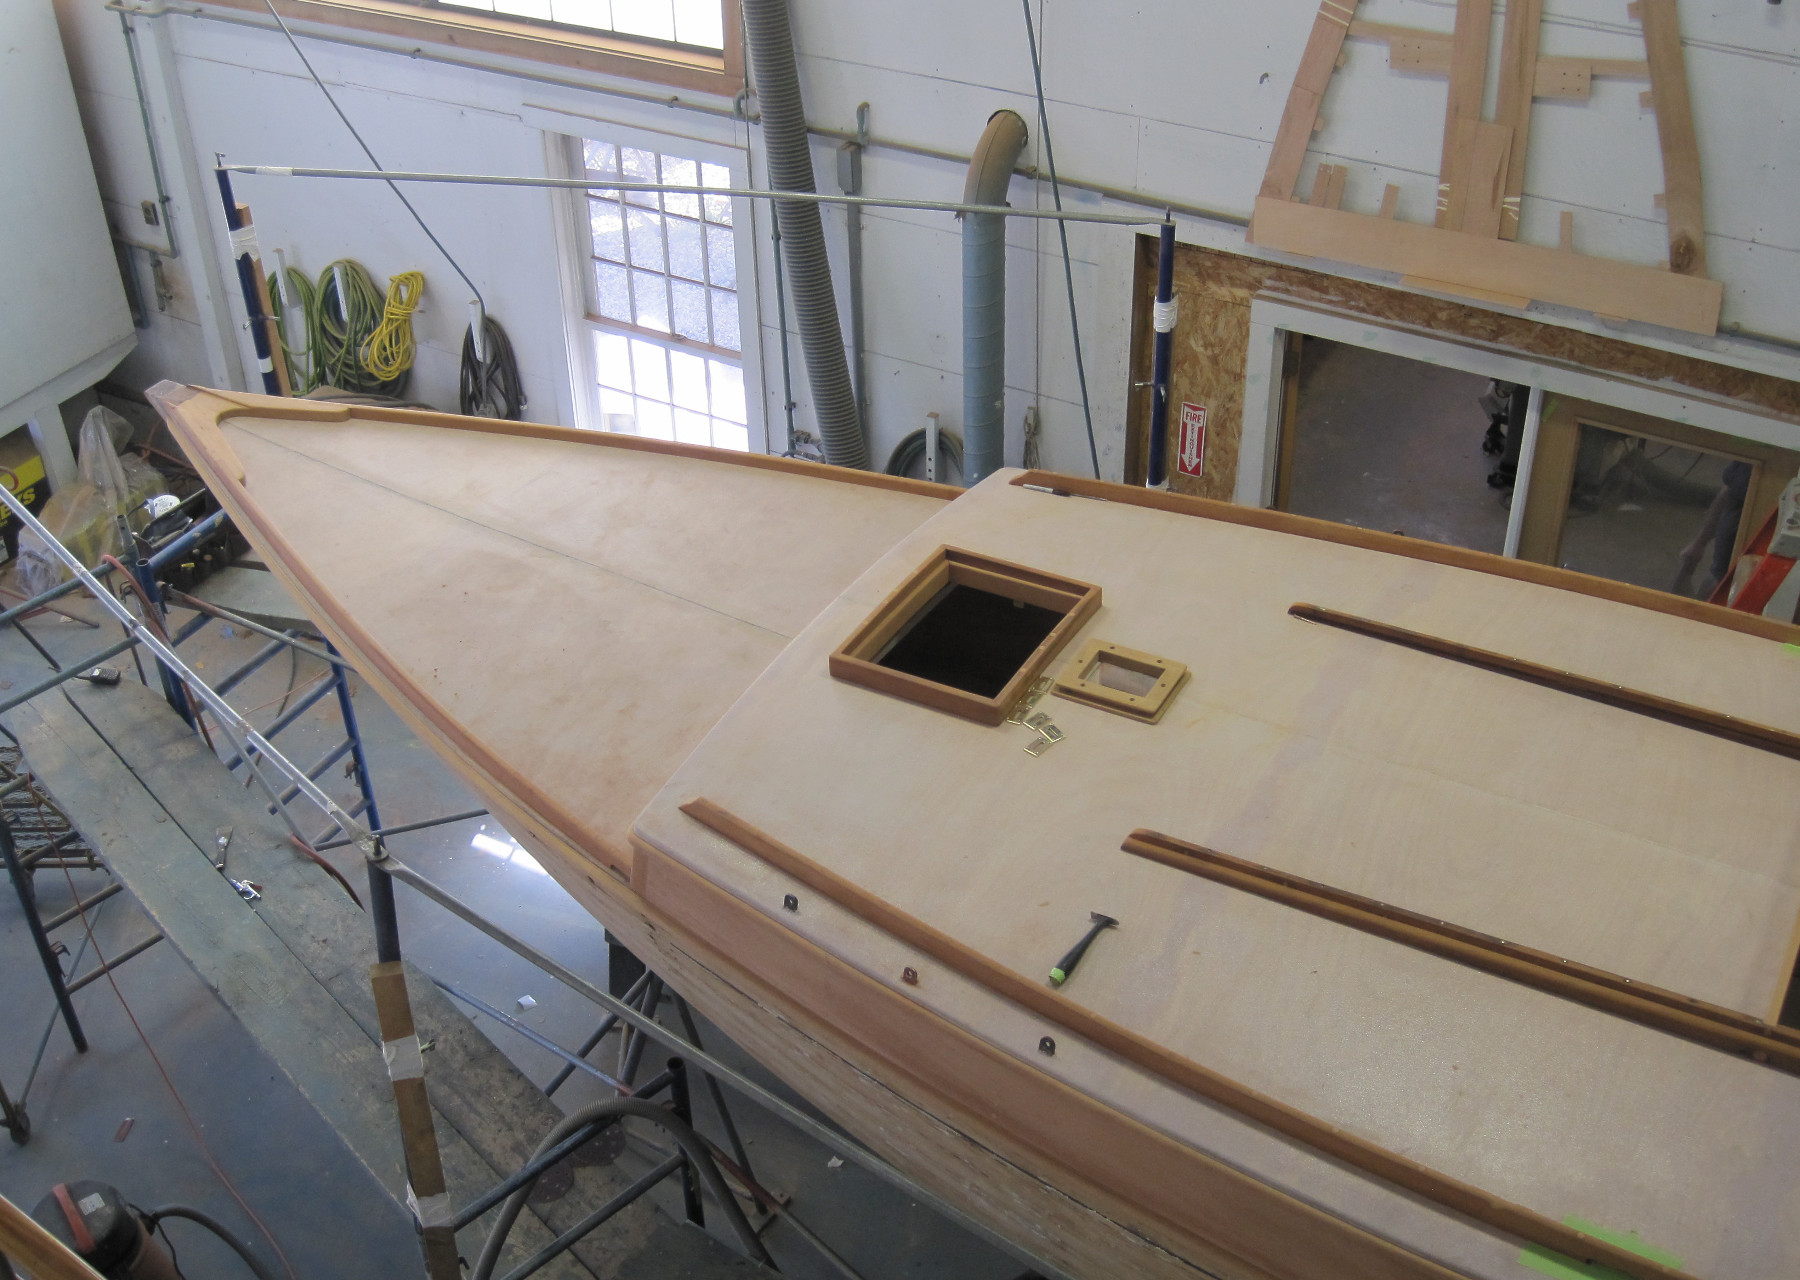 Wooden Boat Restoration - Kestrel - An overall view of the house and deck work.